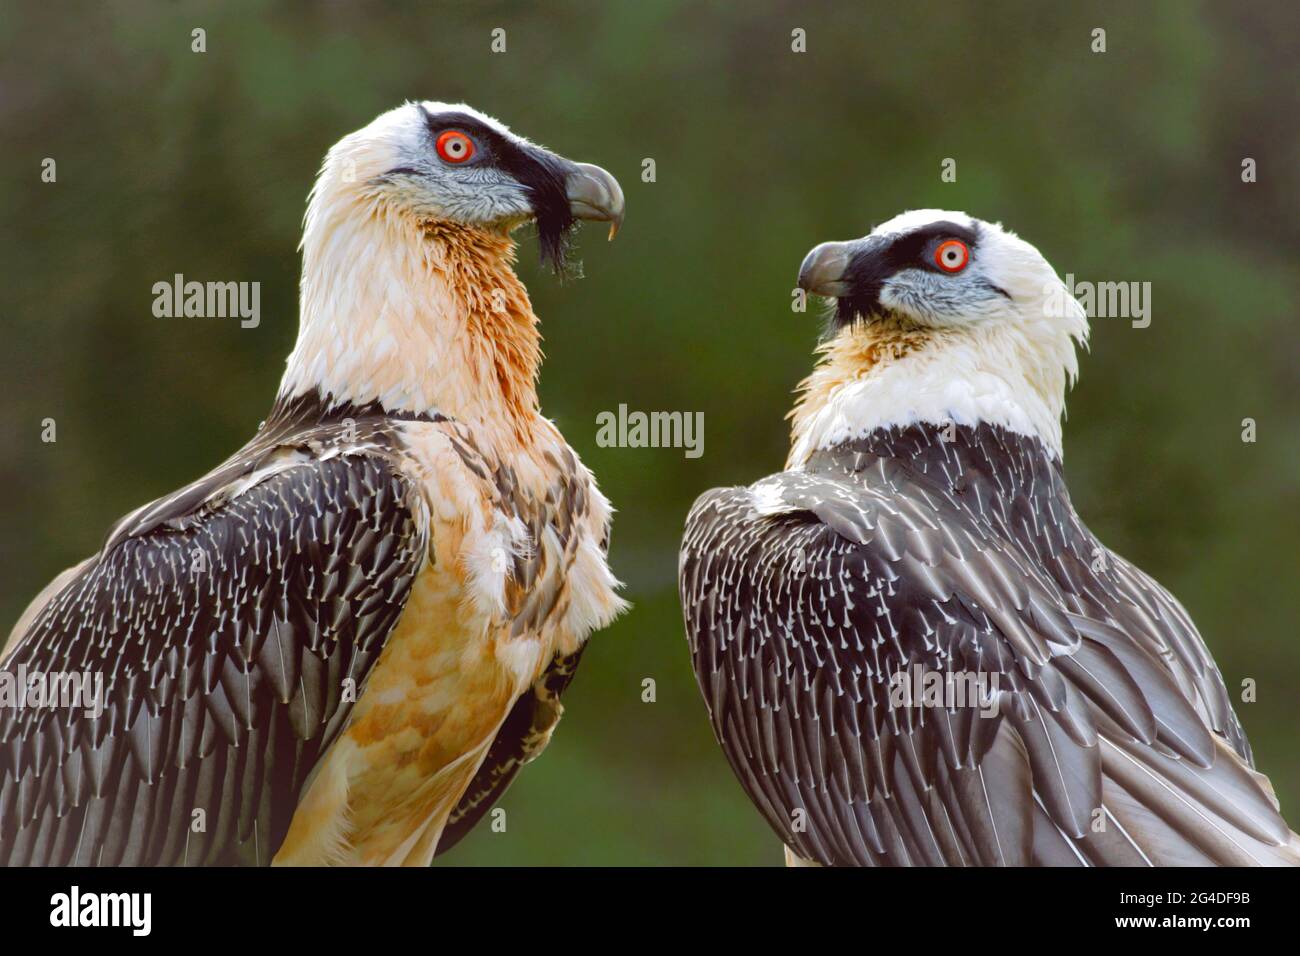 Bearded Vulture, pair in breeding plumage sitting together, closeup. Stock Photo